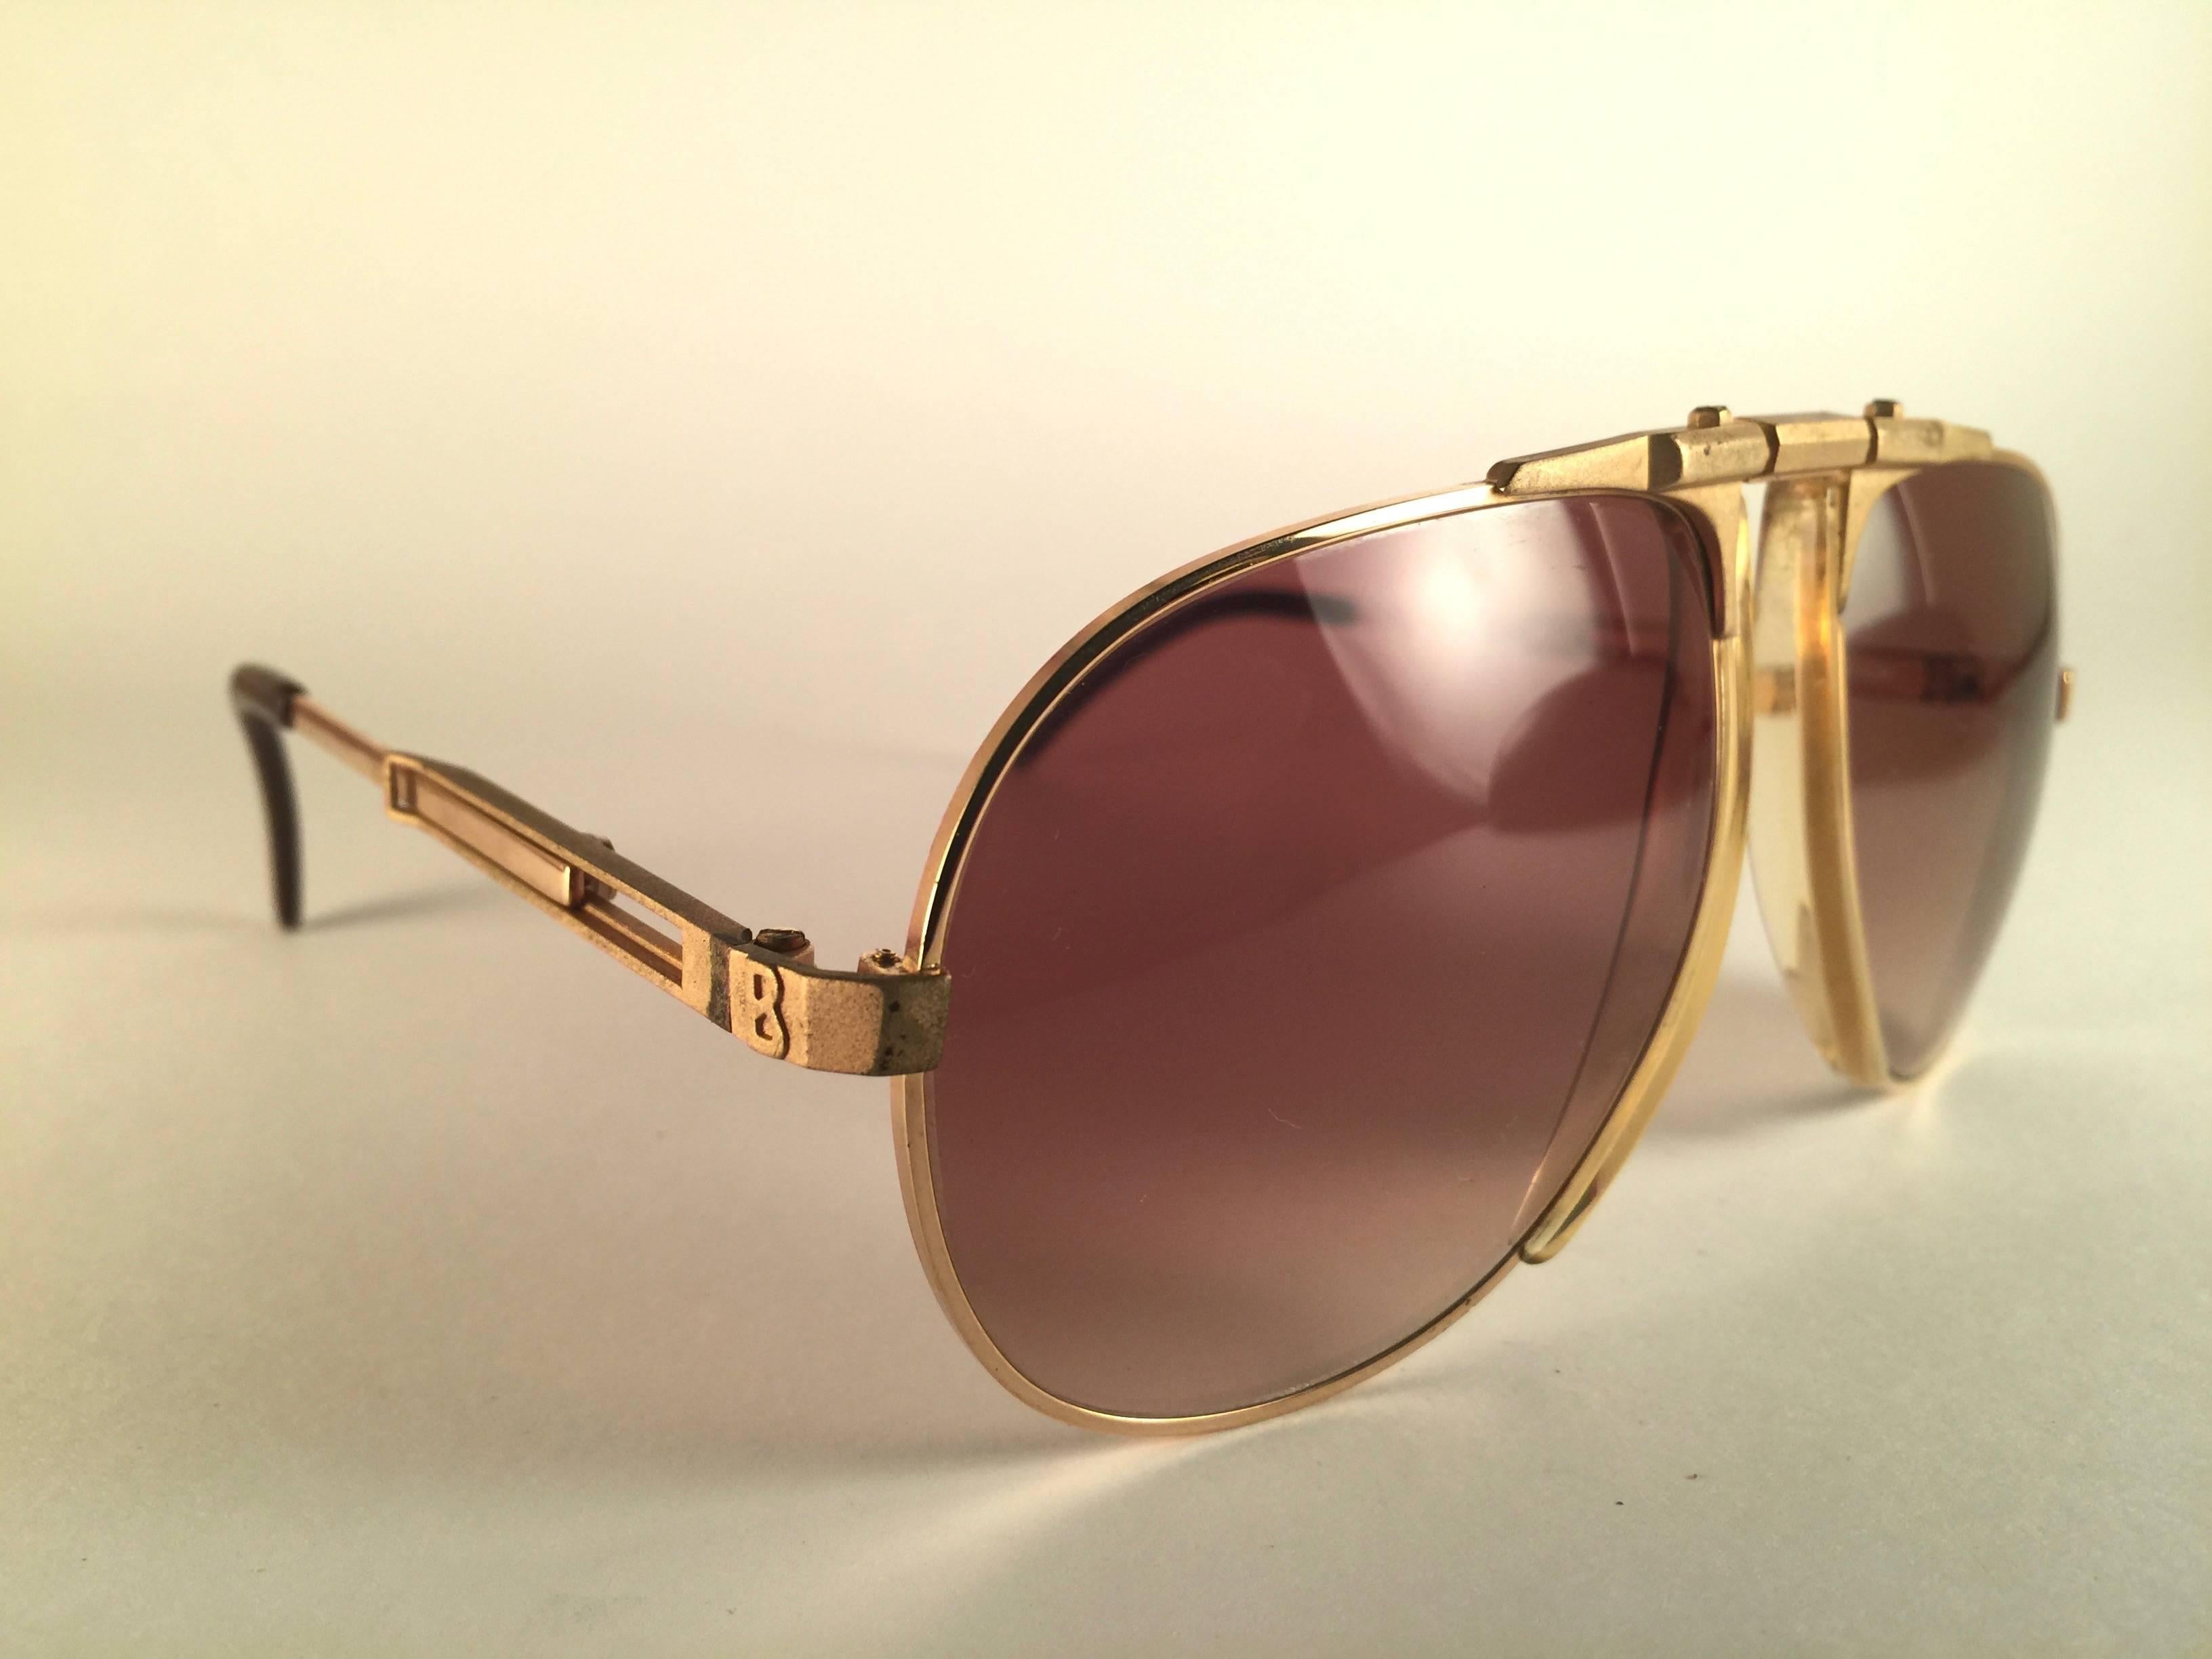 Rare item.   
New vintage Bogner by Eschenbach sunglasses 7004 in matte gold with brown gradient lenses. 
New, never worn or displayed, this pair comes with its original leather sleeve.  
Made in Austria.
